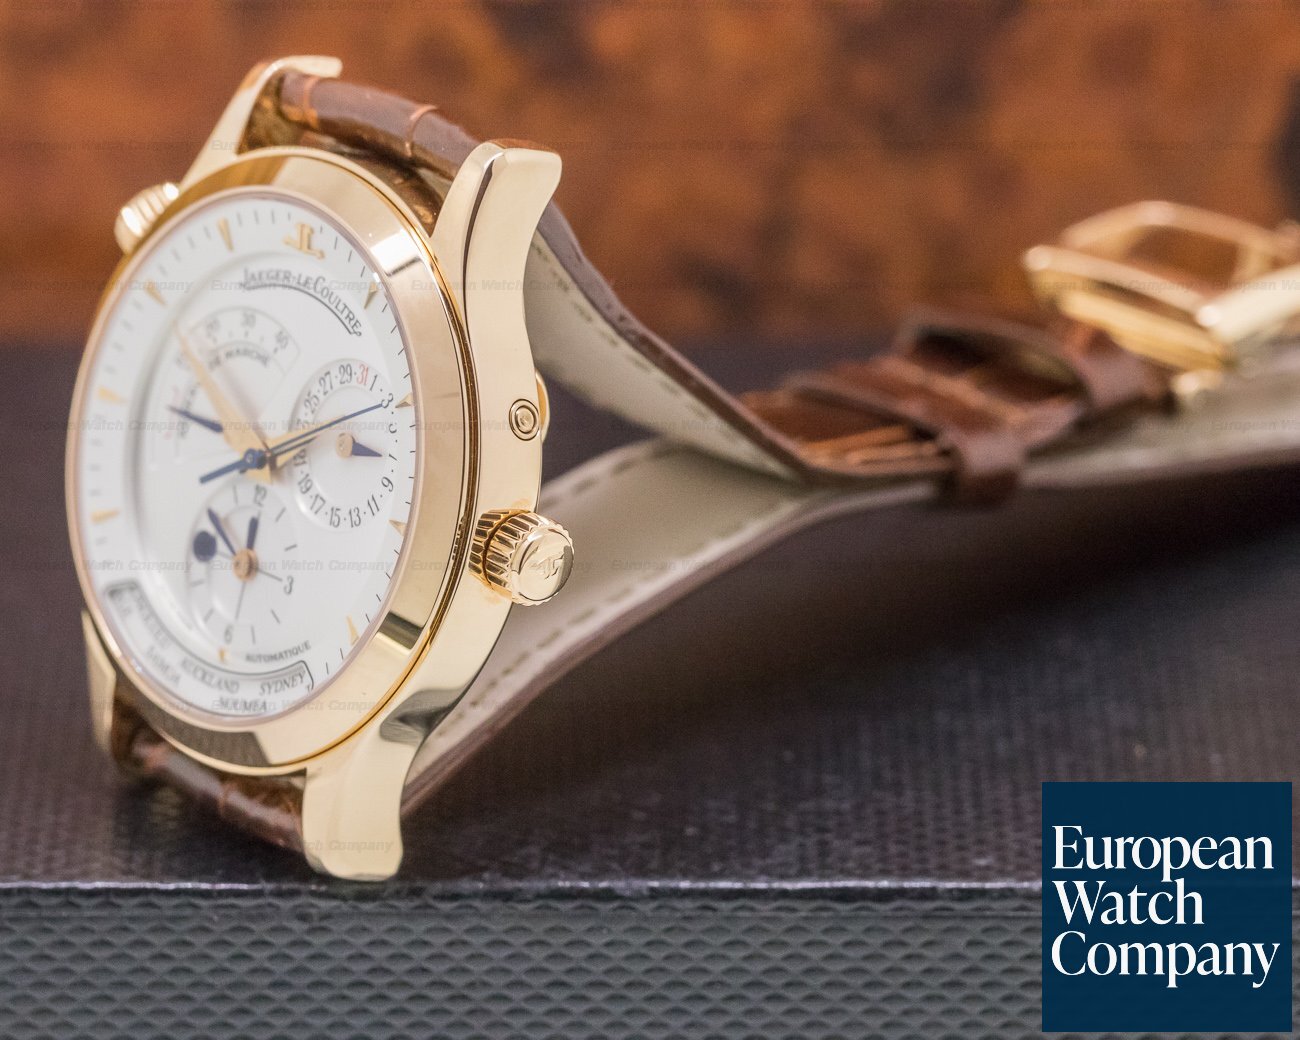 Jaeger LeCoultre Master Geographic 18K Rose Gold Ref. 142.2.92